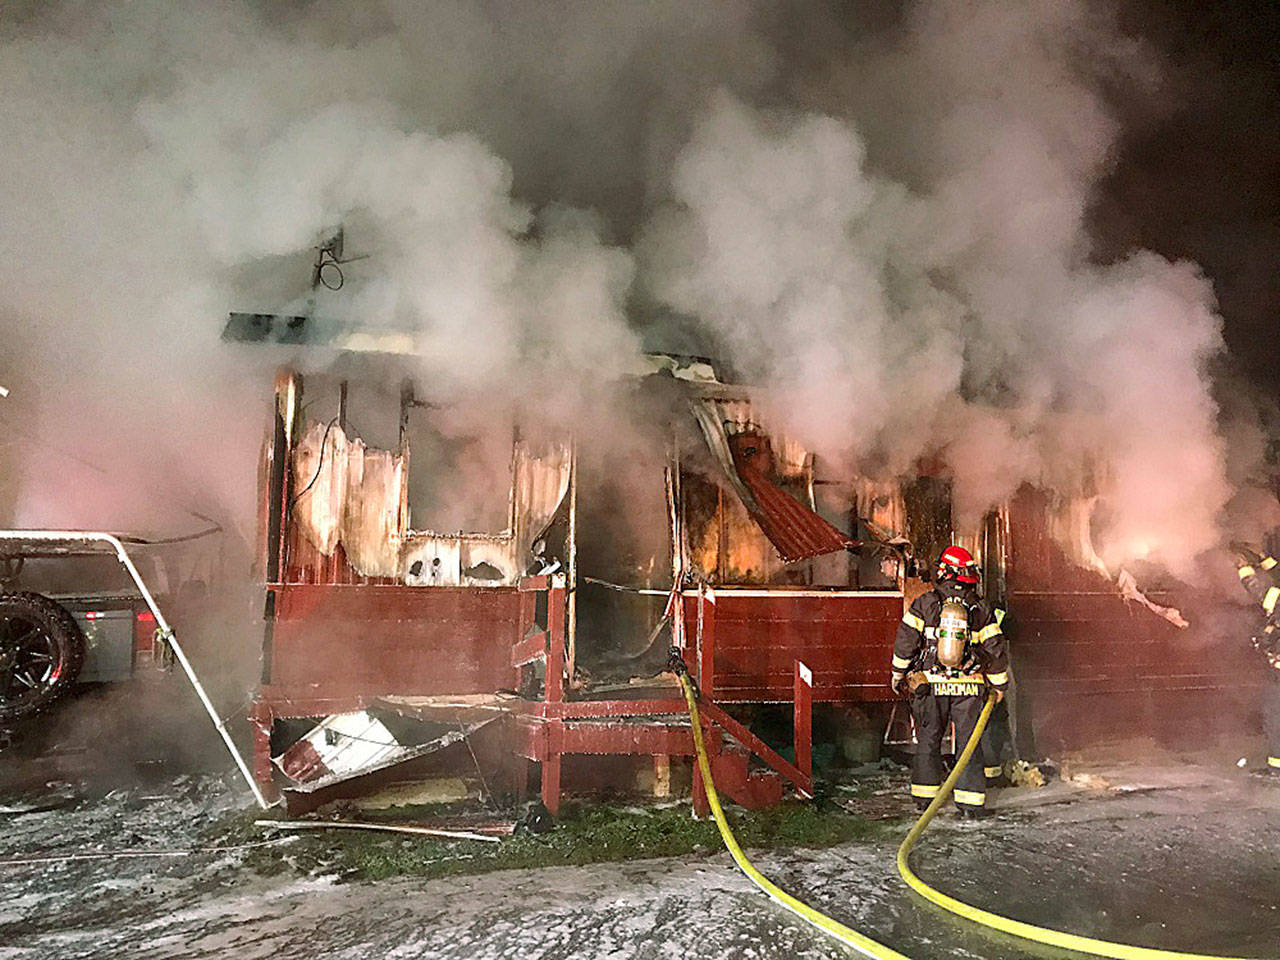 Puget Sound Regional Fire Authority firefighters douse a double-wide mobile home fire in the 24400 block of 64 Avenue South early Monday morning. COURTESY PHOTO, Puget Sound RFA